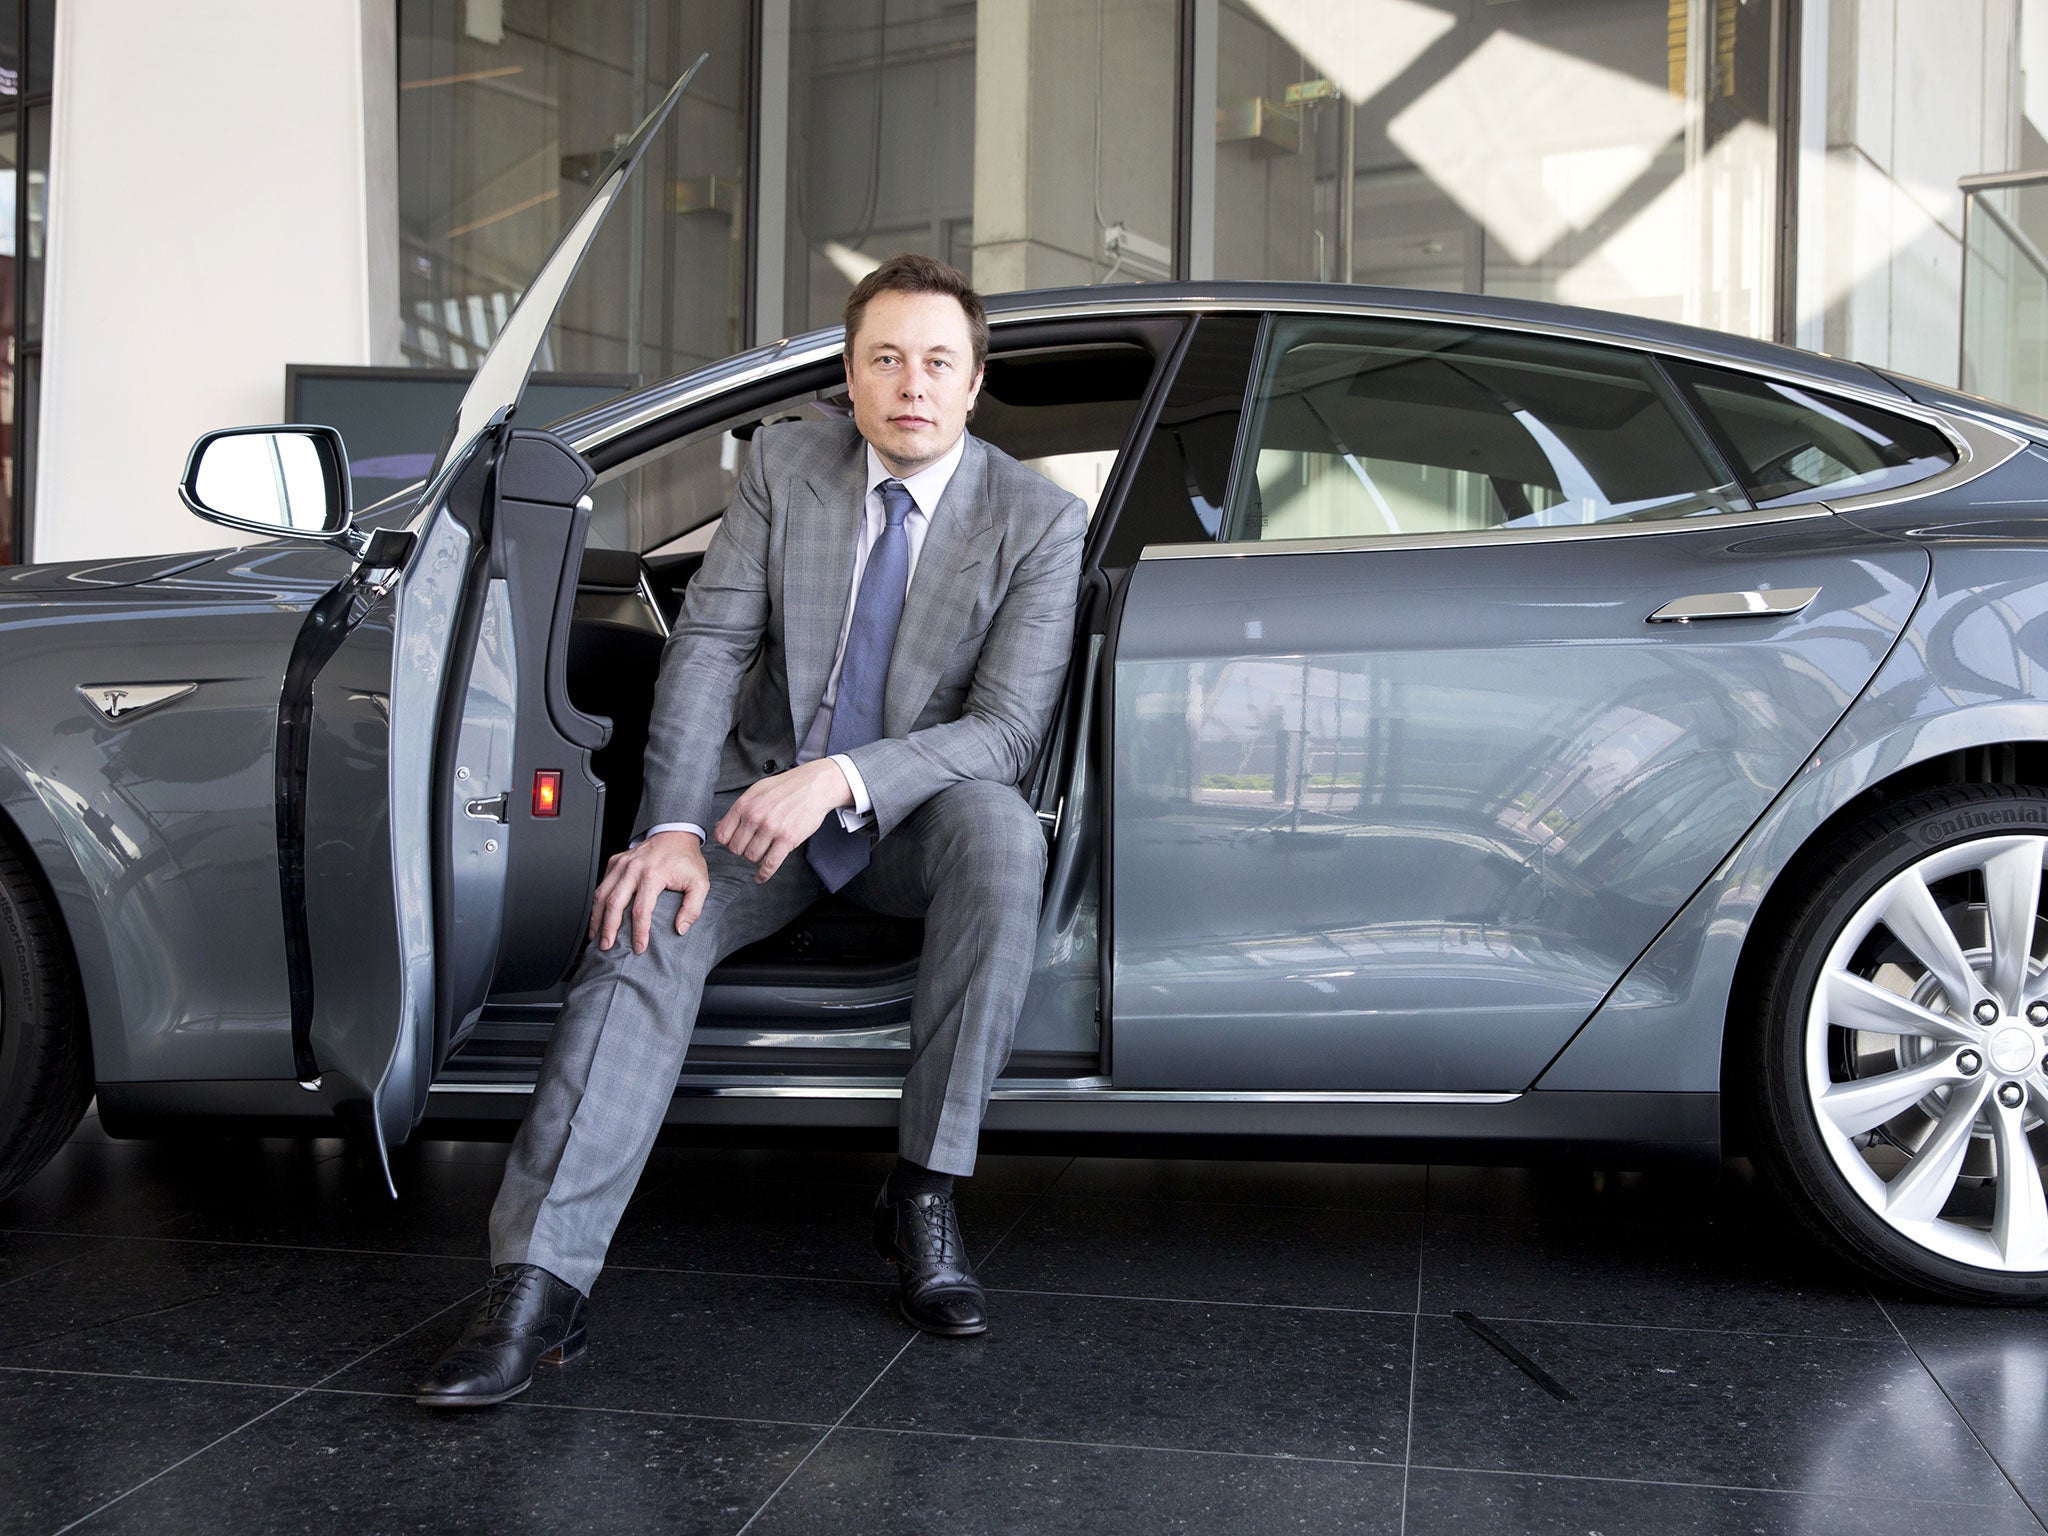 Elon Musk is also the chief executive of Tesla Motors